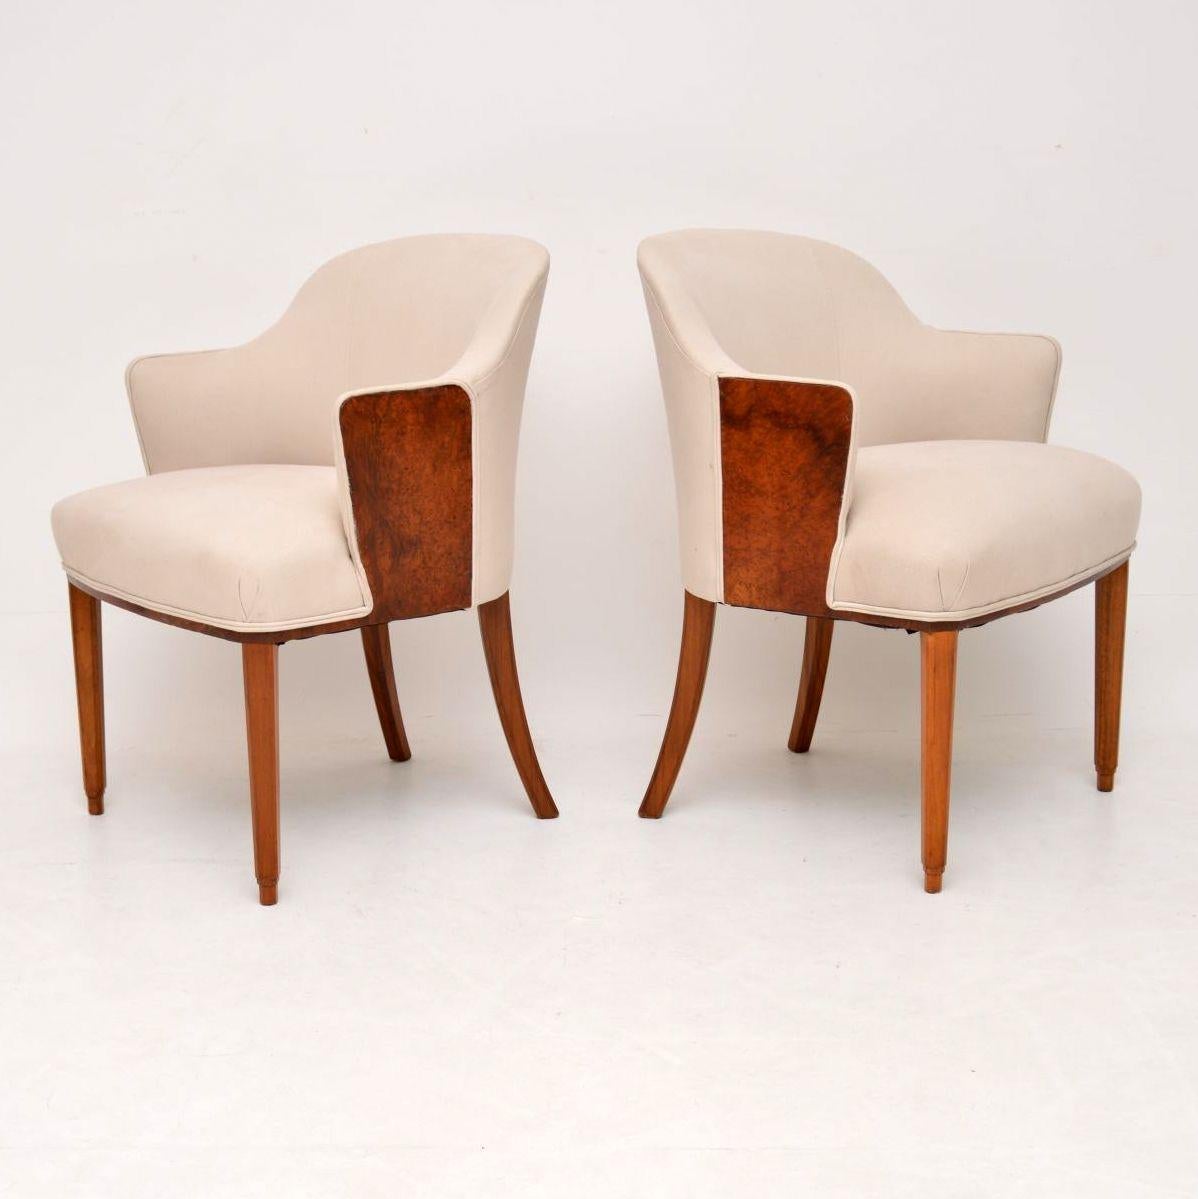 Stylish pair of original Art Deco armchairs dating from the 1920s-1930s period, in excellent condition having just been French polished and re-upholstered in a neutral colored fabric. They have burr walnut panels on the sides of the arms and solid